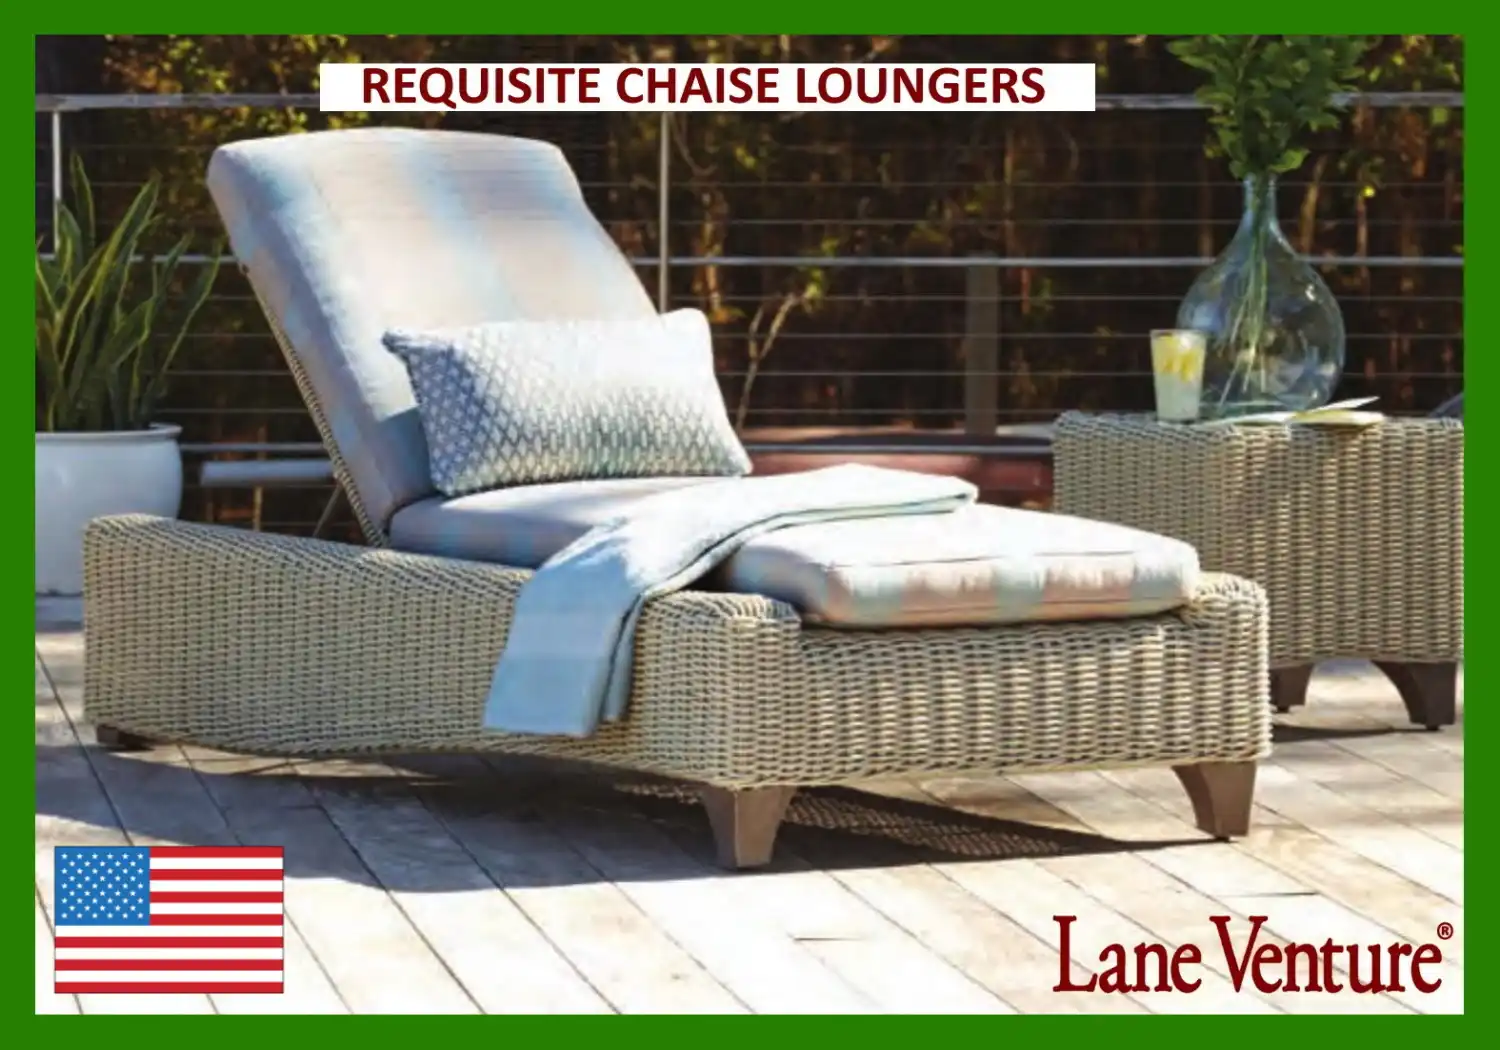 REQUISITE CHAISE LOUNGERS